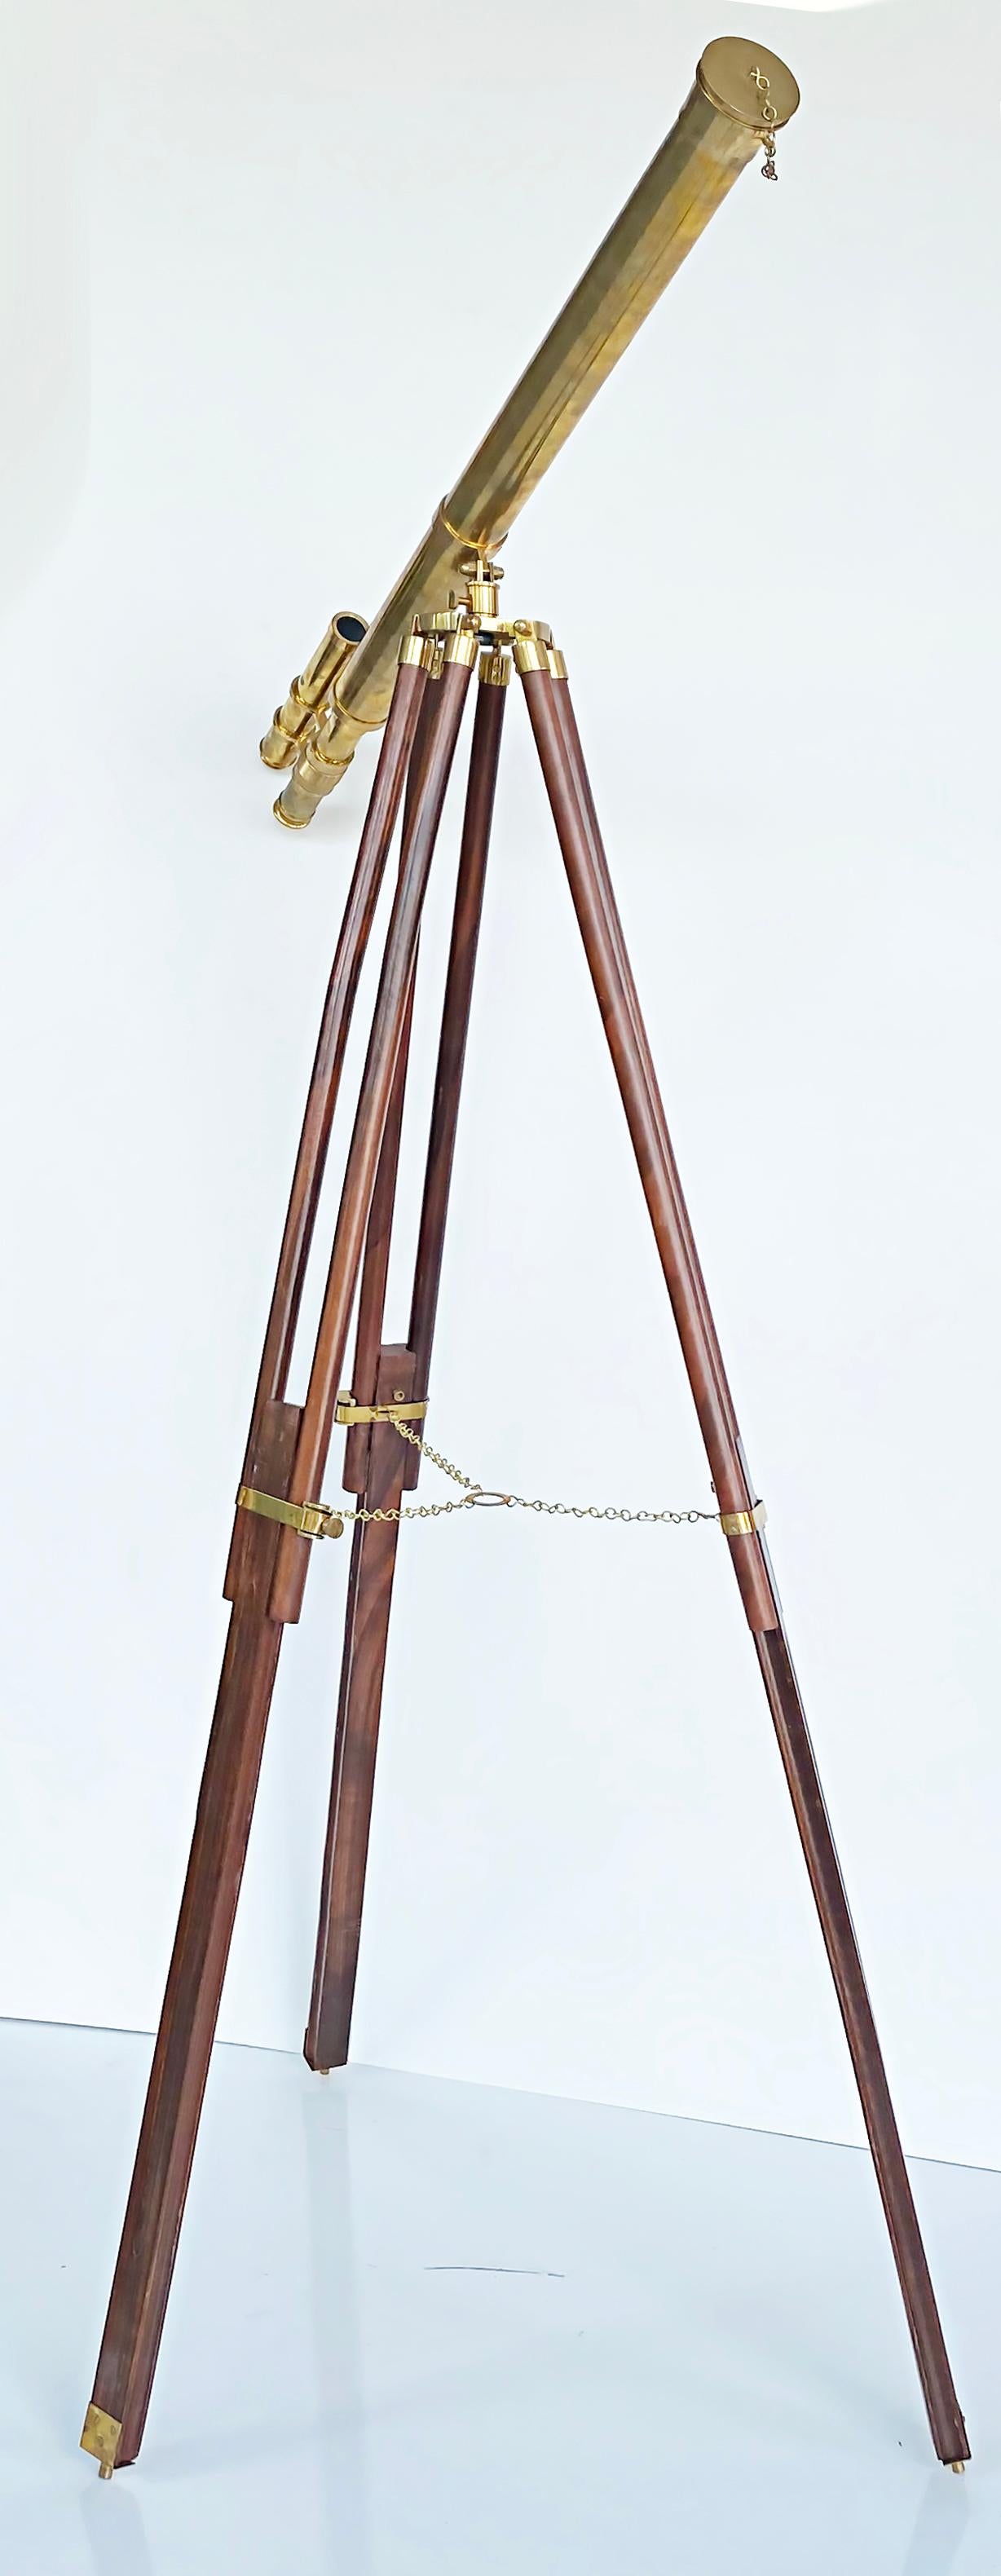 American Brass Double Telescope Mounted on Adjustable Tripod Wooden, Brass Mounted Stand